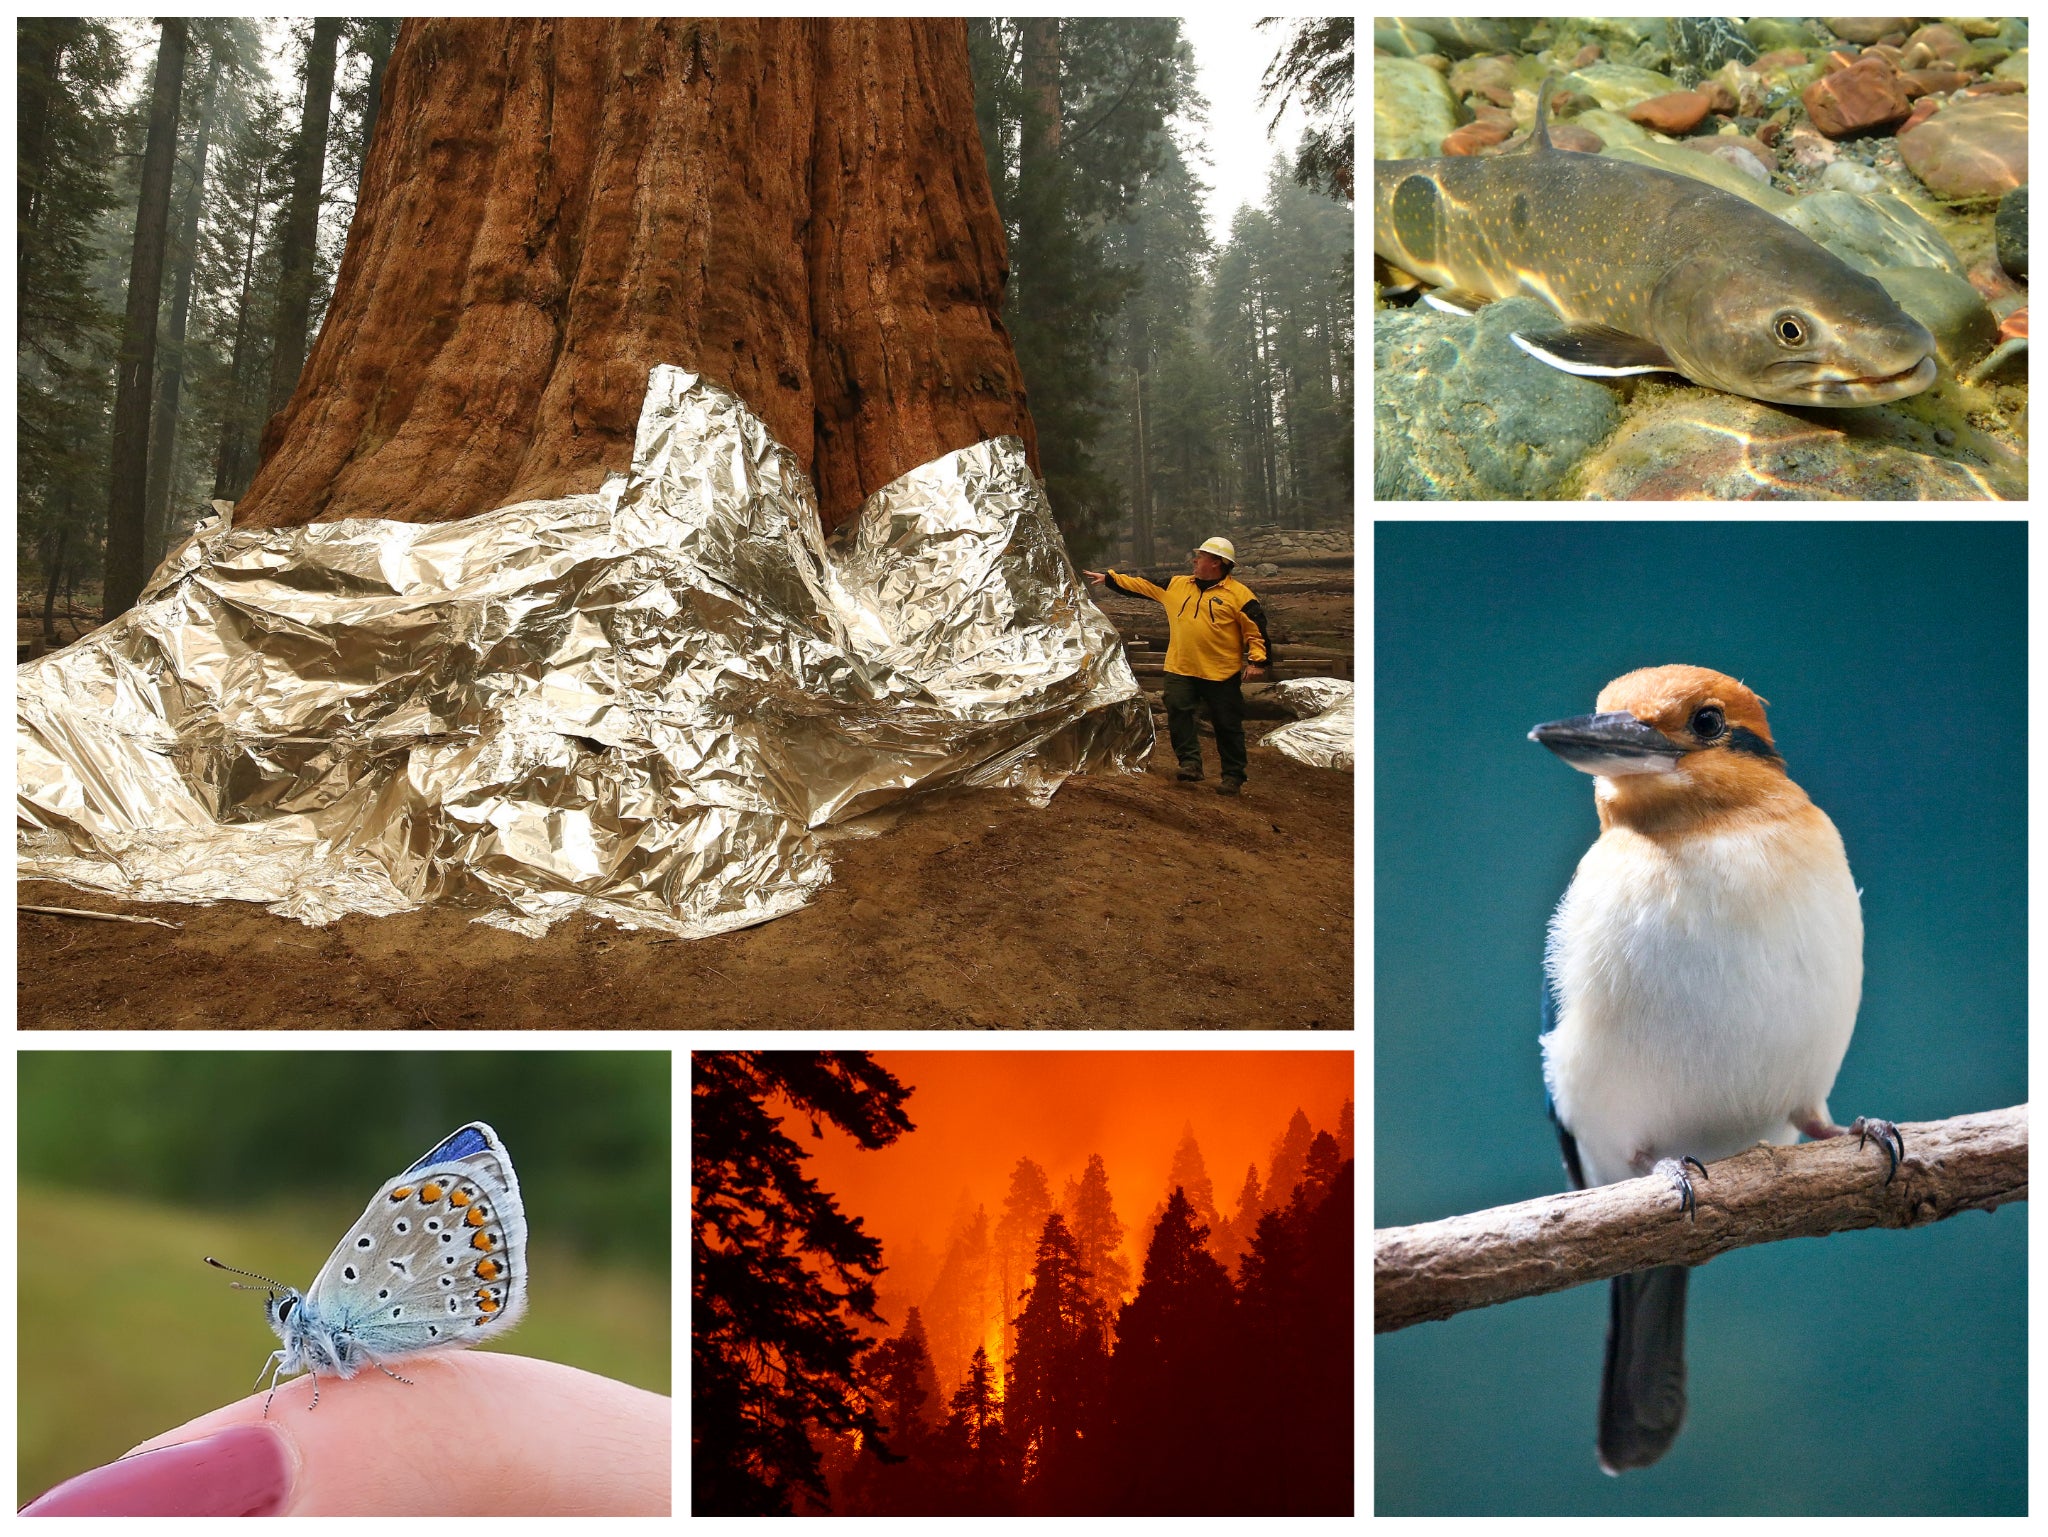 <p>From top left, clockwise: The General Sherman sequoia wrapped in foil to protect against wildfire, a bull trout in Montana, a Guam kingfisher, the 2020 SQF forest fire complex in California and the endangered Karner blue butterfly.</p>